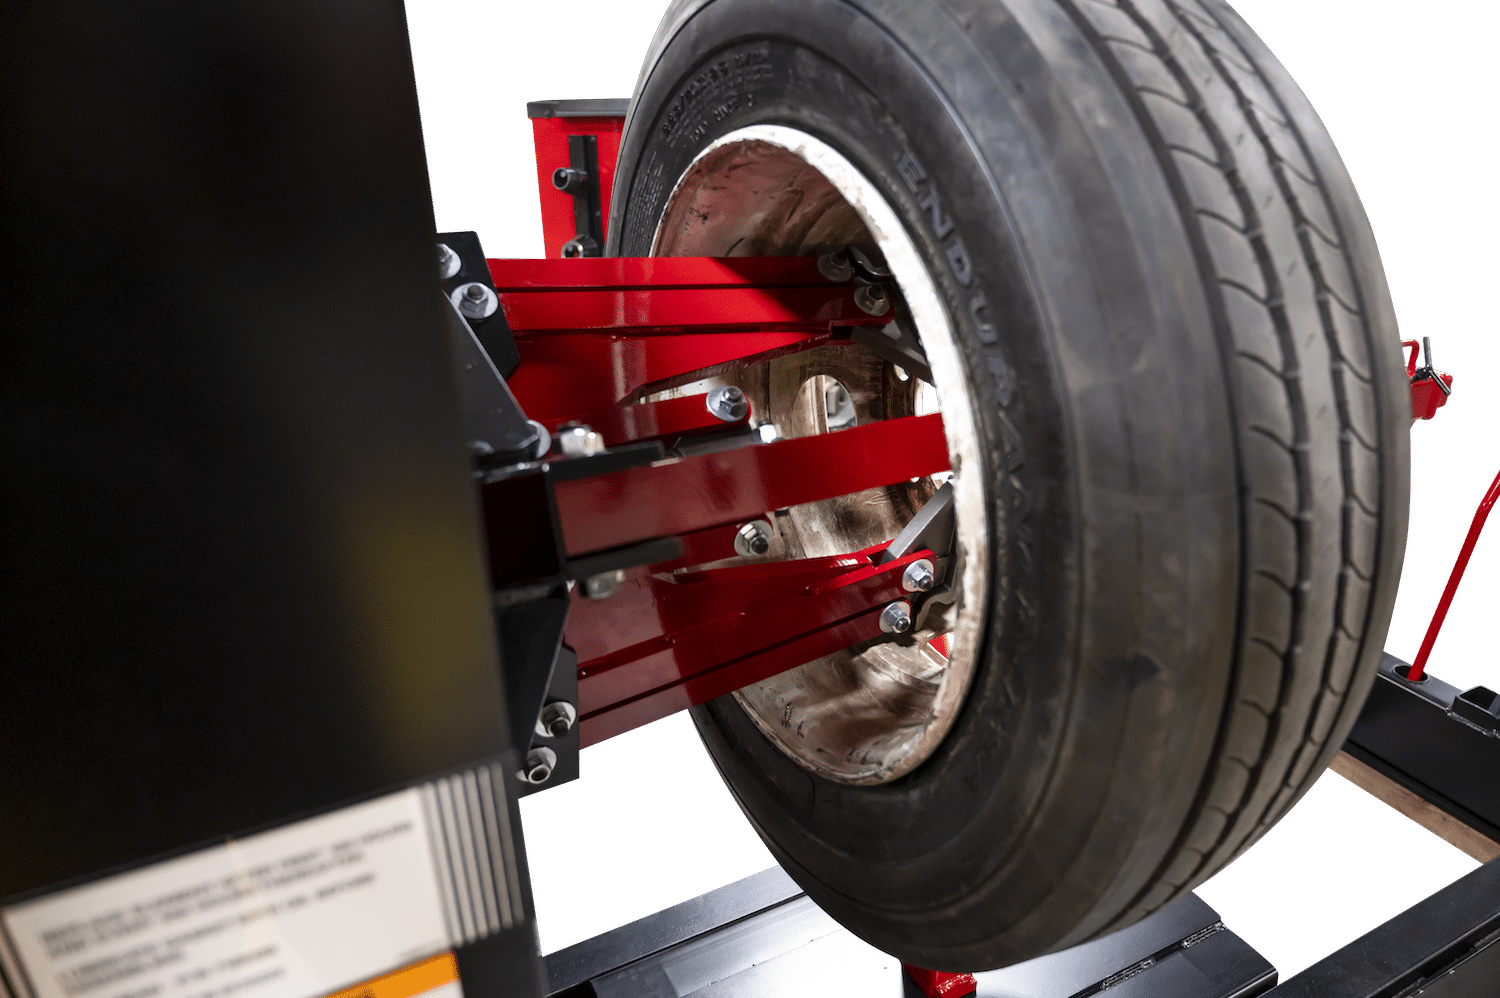 A close up of the hydraulic clamping chuck holding a tire in place on a heavy duty tire changer